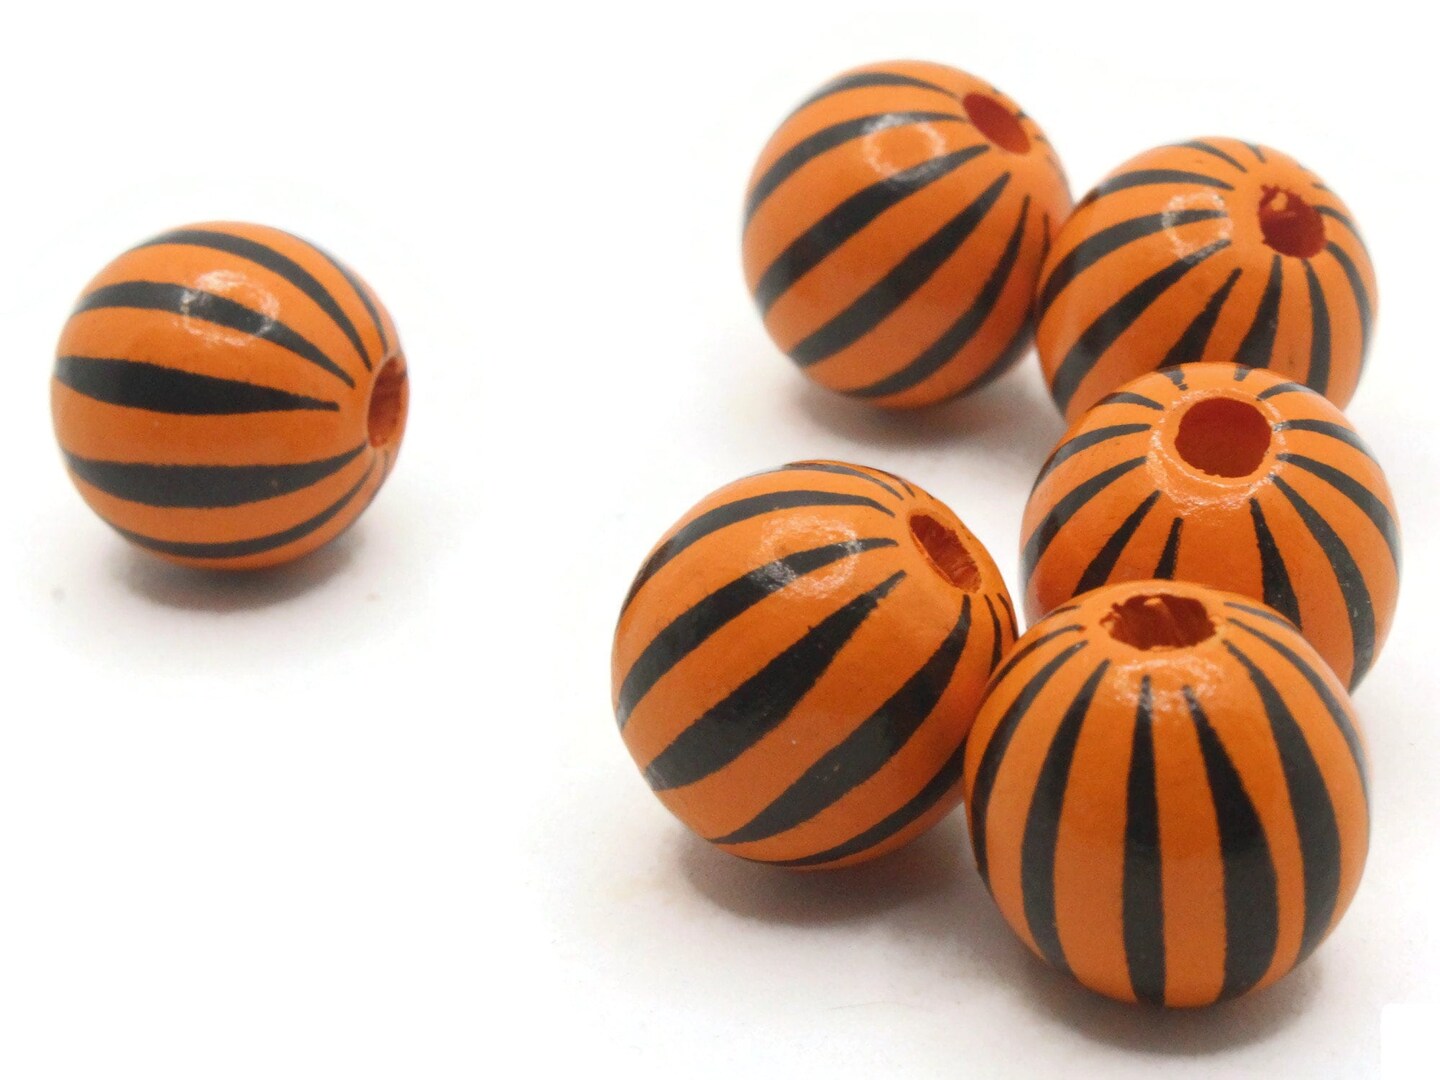 6 15mm Black and White Striped Round Wood Beads by Smileyboy Beads | Michaels